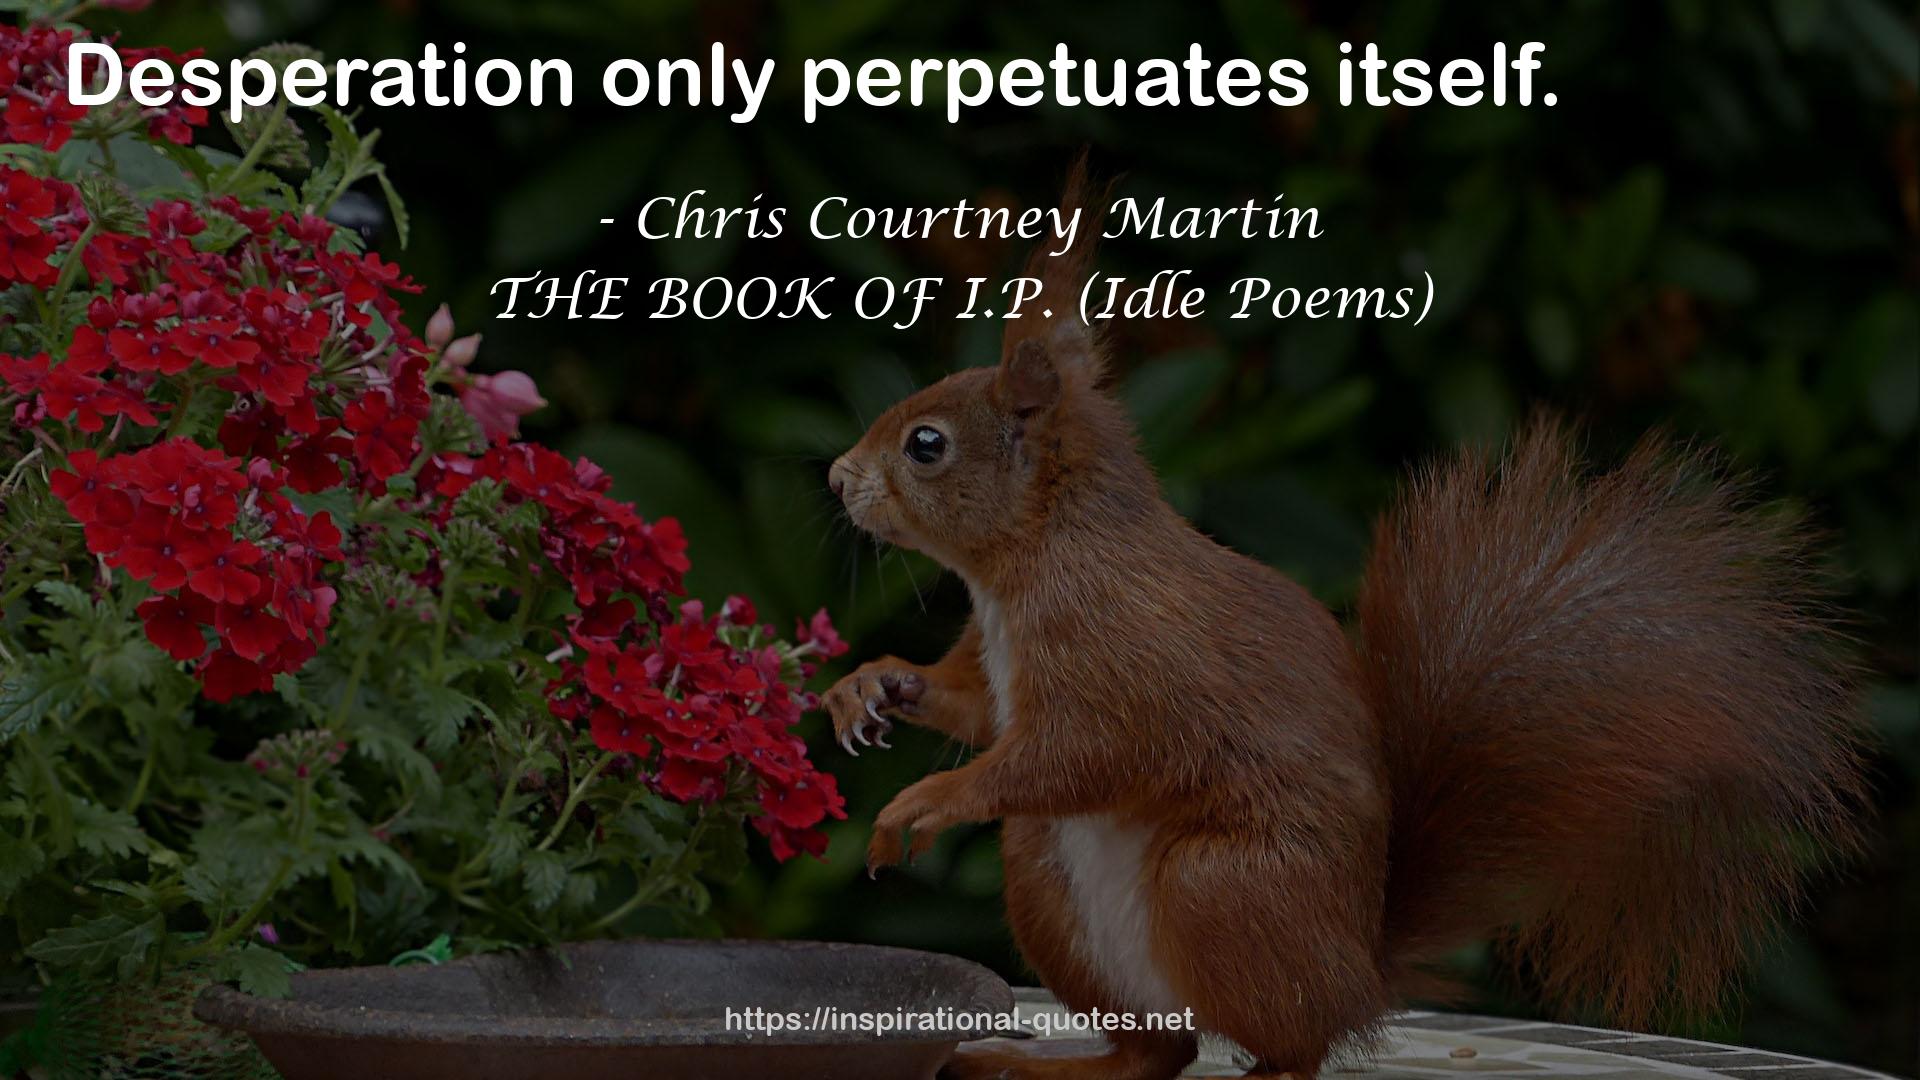 THE BOOK OF I.P. (Idle Poems) QUOTES